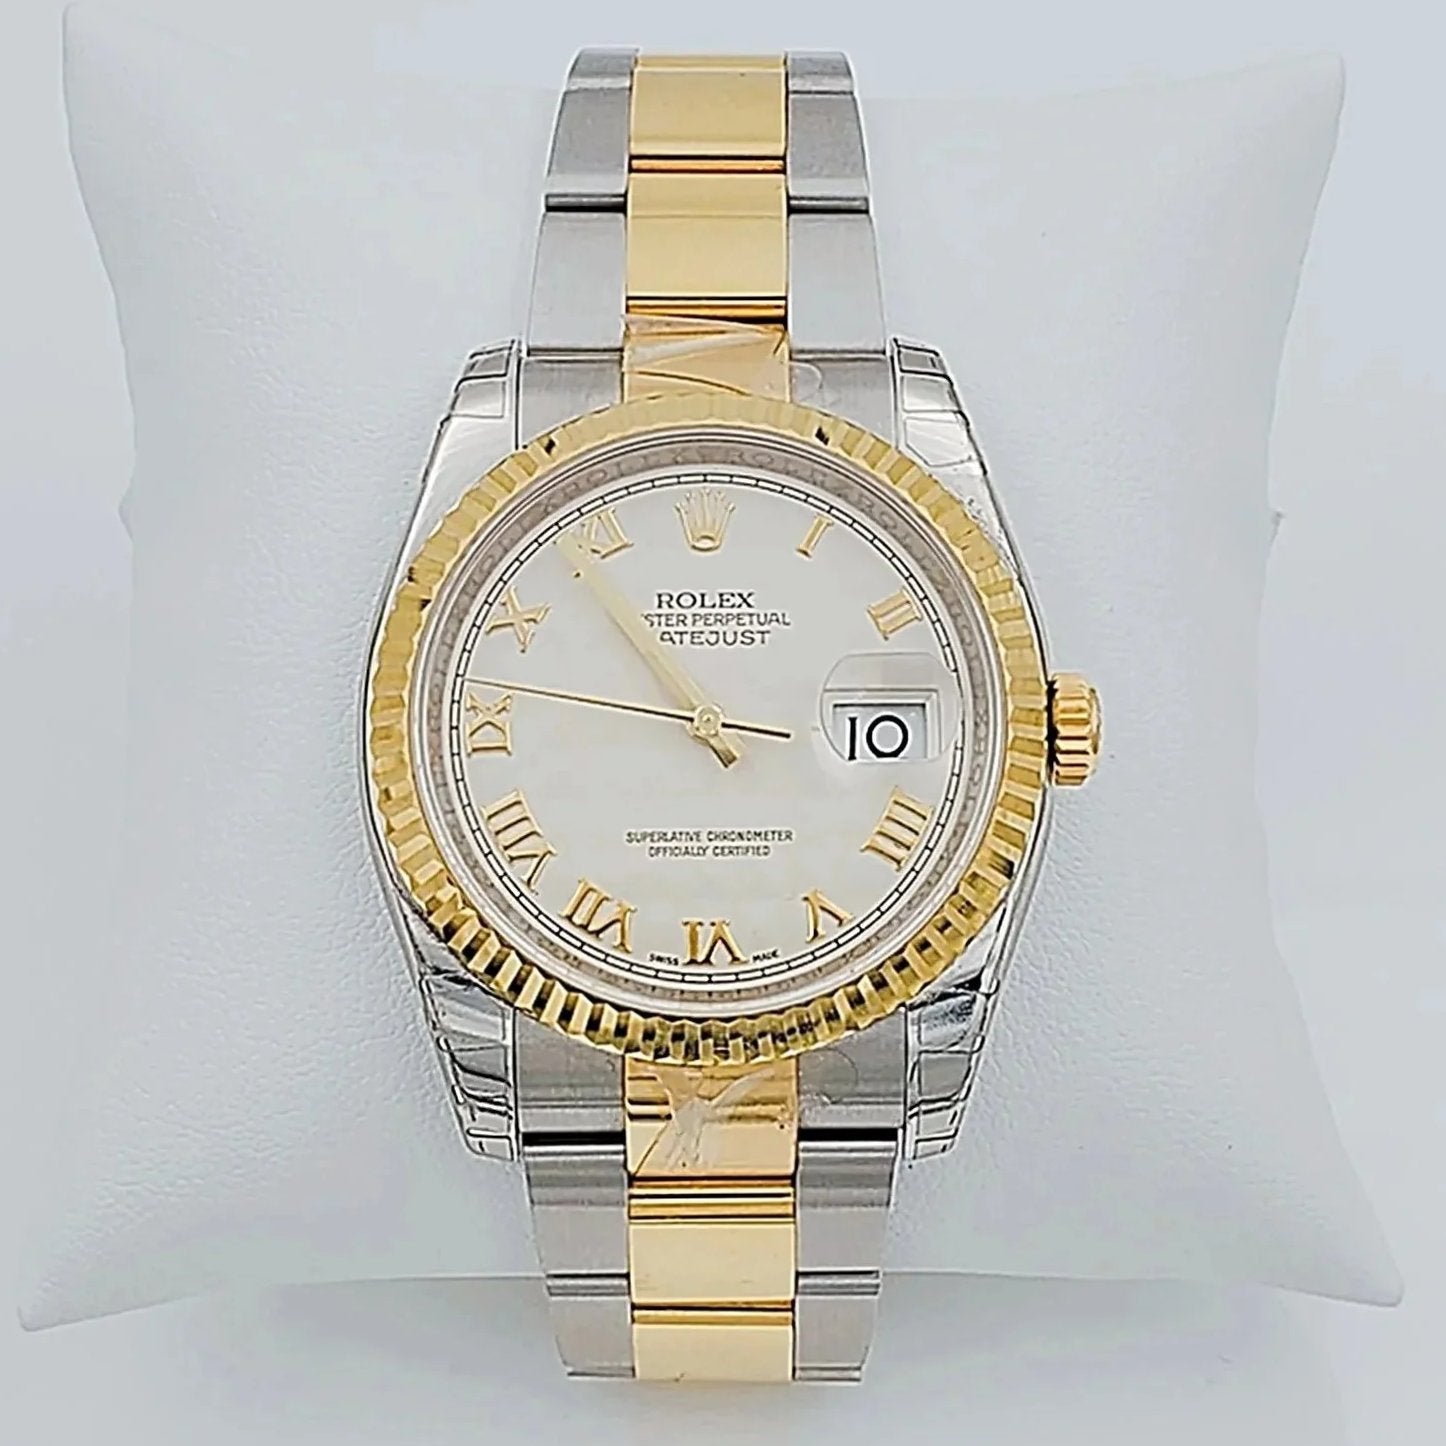 Men's Rolex DateJust 36mm Oyster Perpetual Two Tone 18K Gold / Stainless Steel B& Wristwatch w/ Egg Shell Dial & Fluted Bezel. (UNWORN 116203)